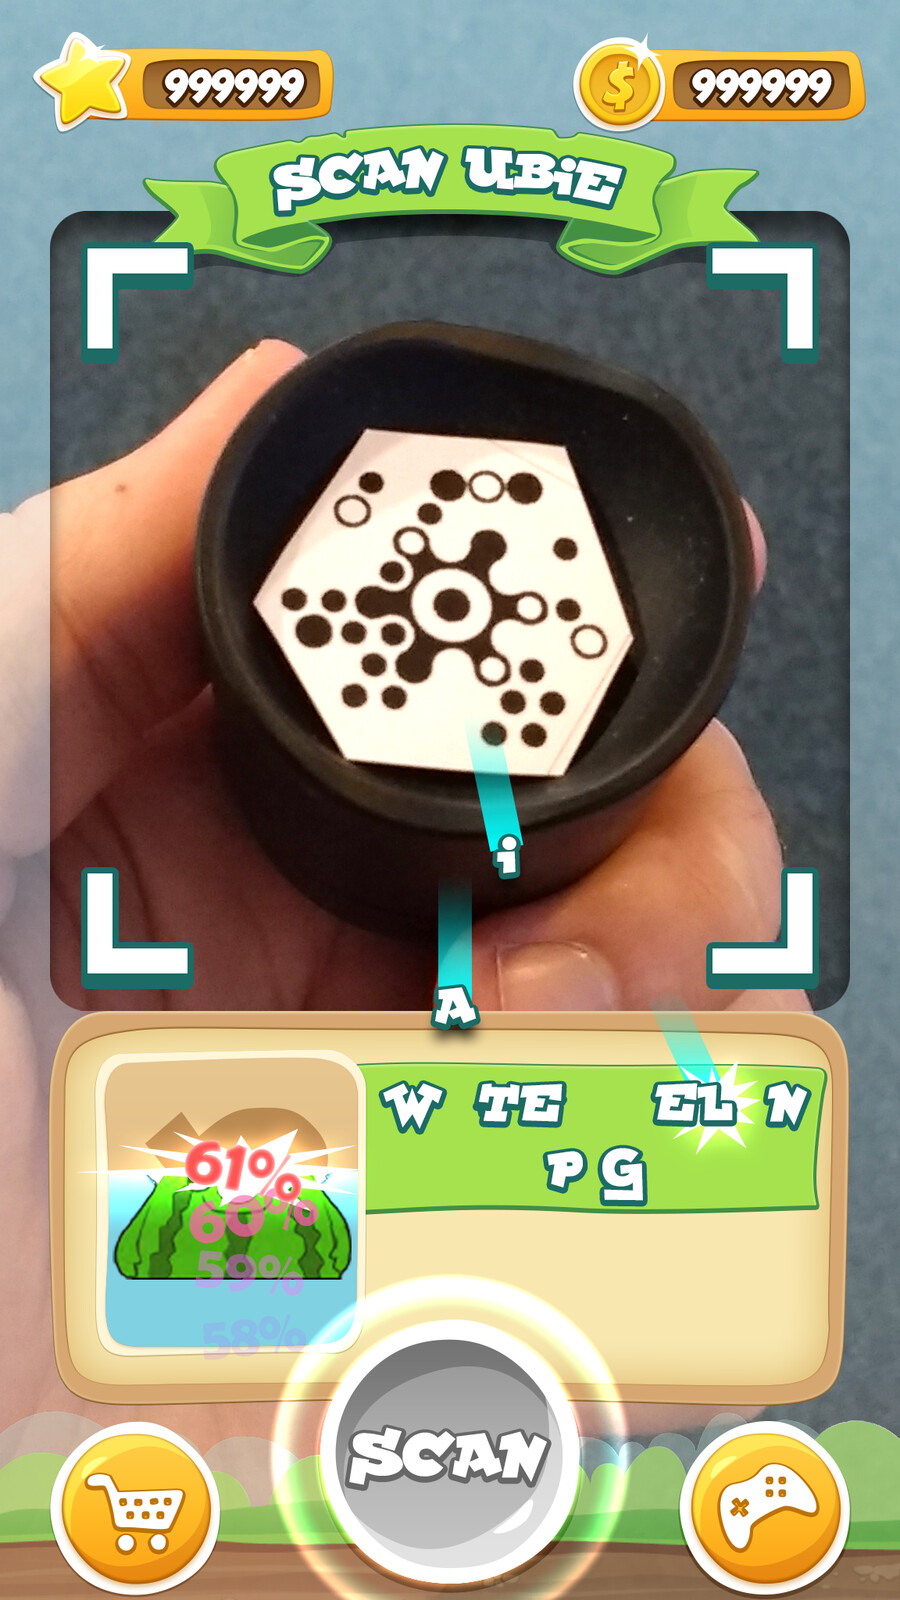 The screen where the player scans the QR code to reveal their new object or character.